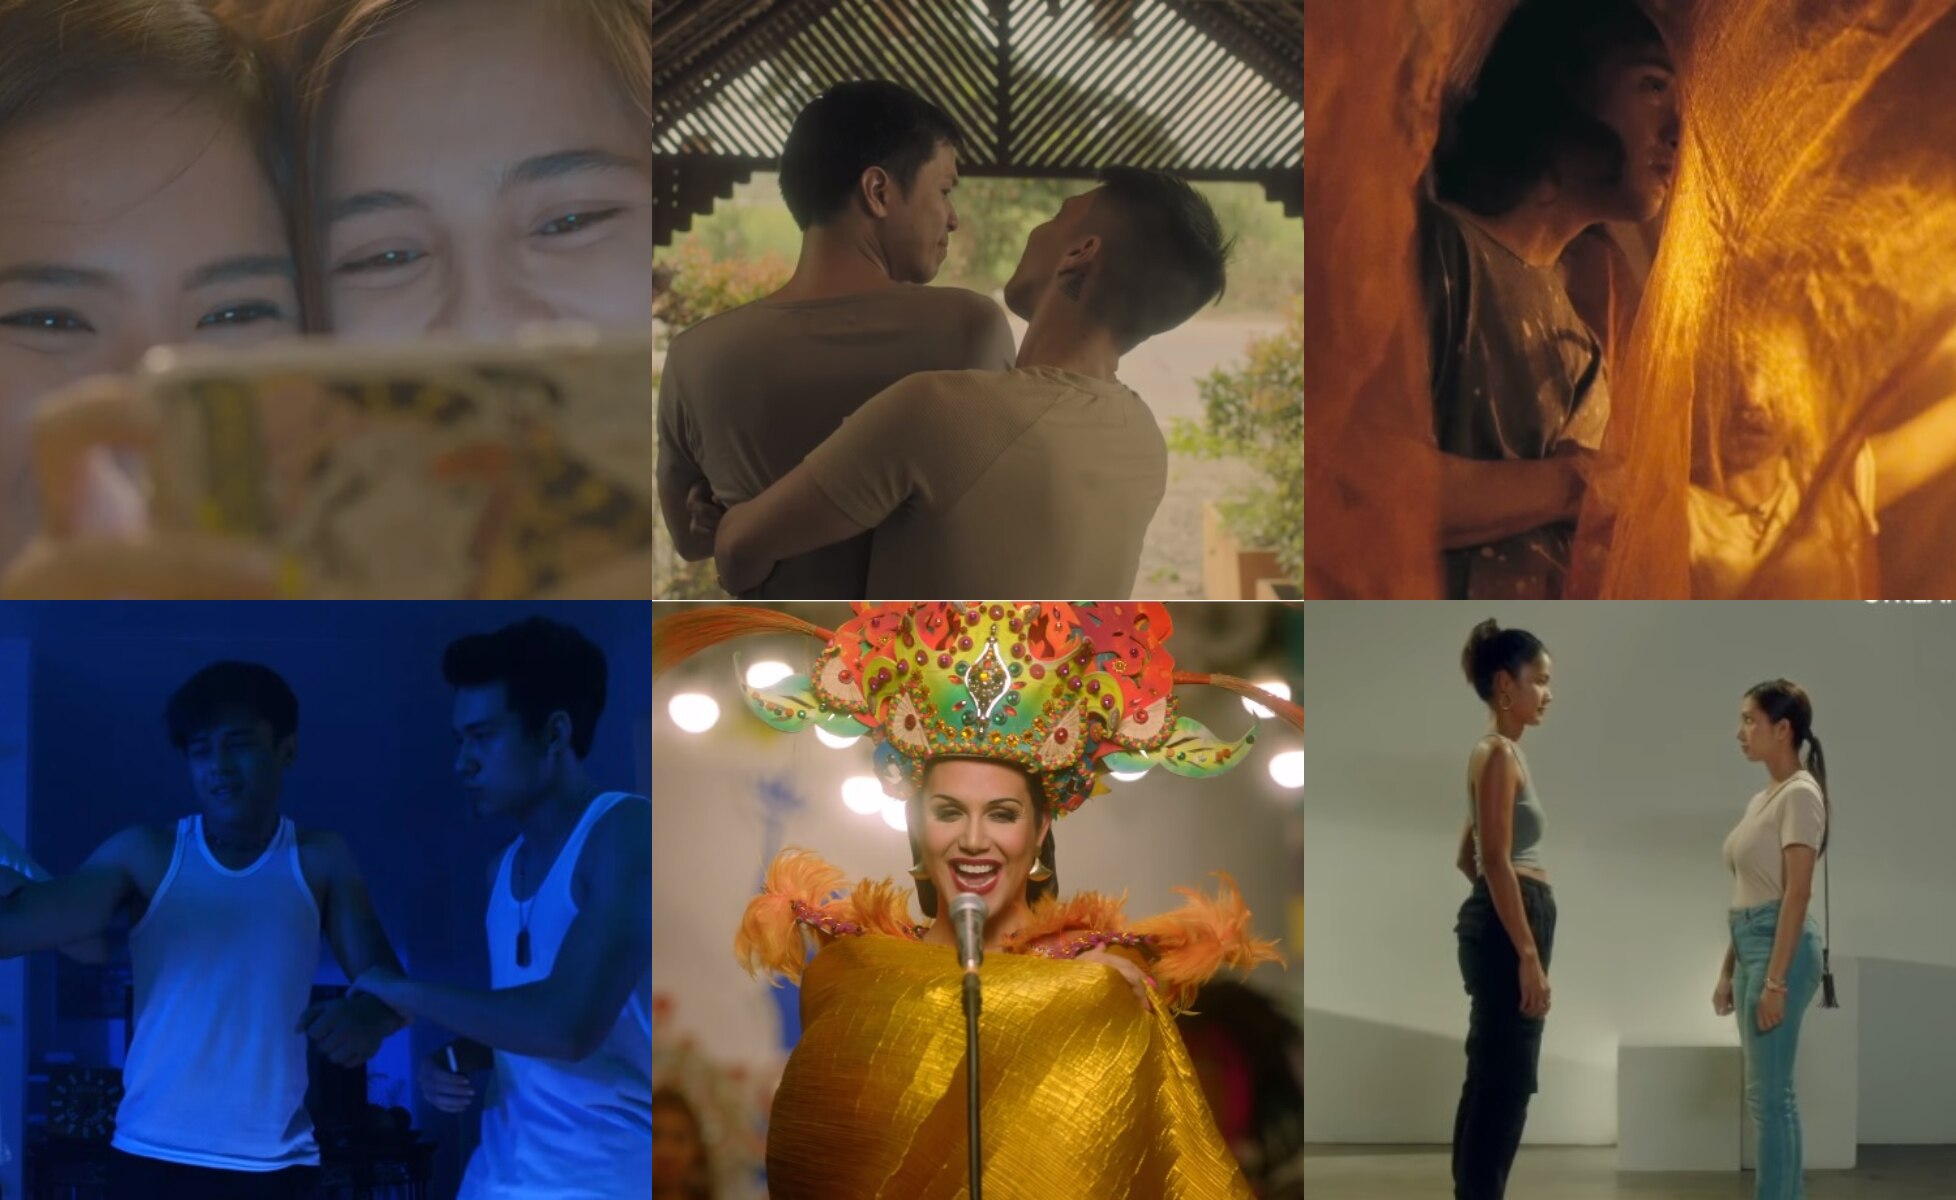 Celebrate pride month with iWant’s diverse collection of queer stories